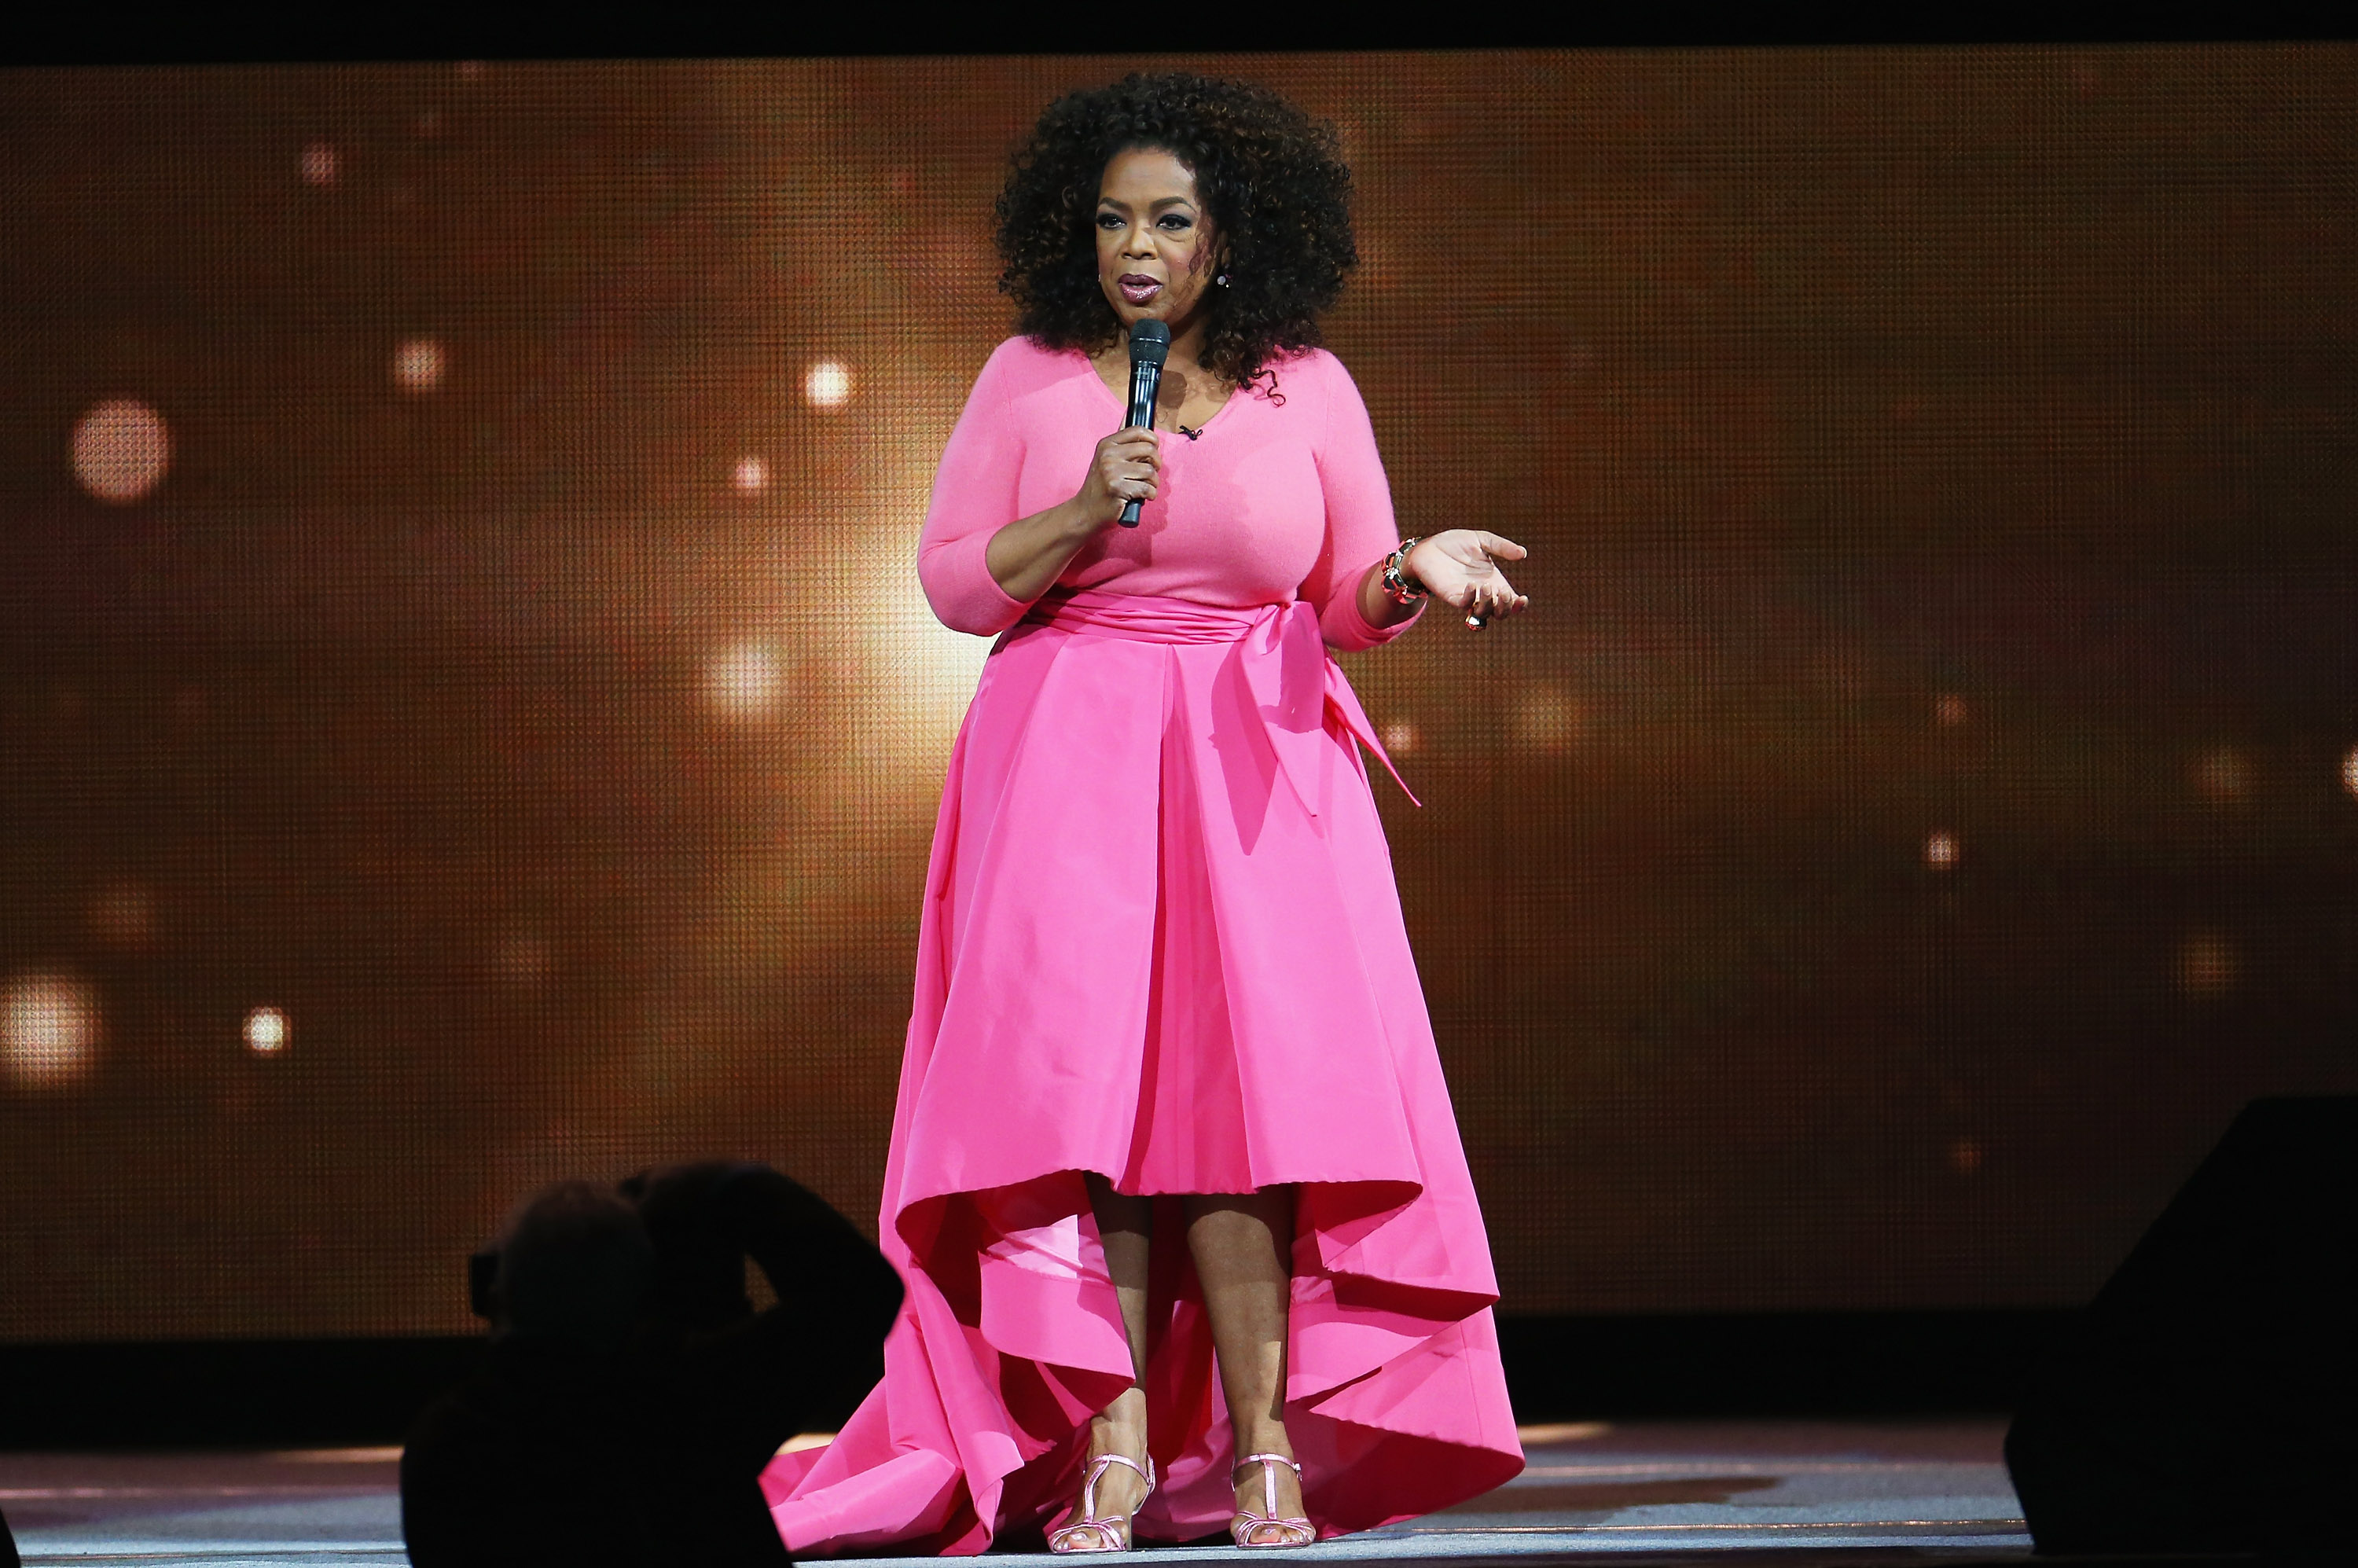 Oprah Winfrey on stage during her "An Evening With Oprah" tour at Allphones Arena on December 12, 2015 in Sydney, Australia. | Source: Getty Images